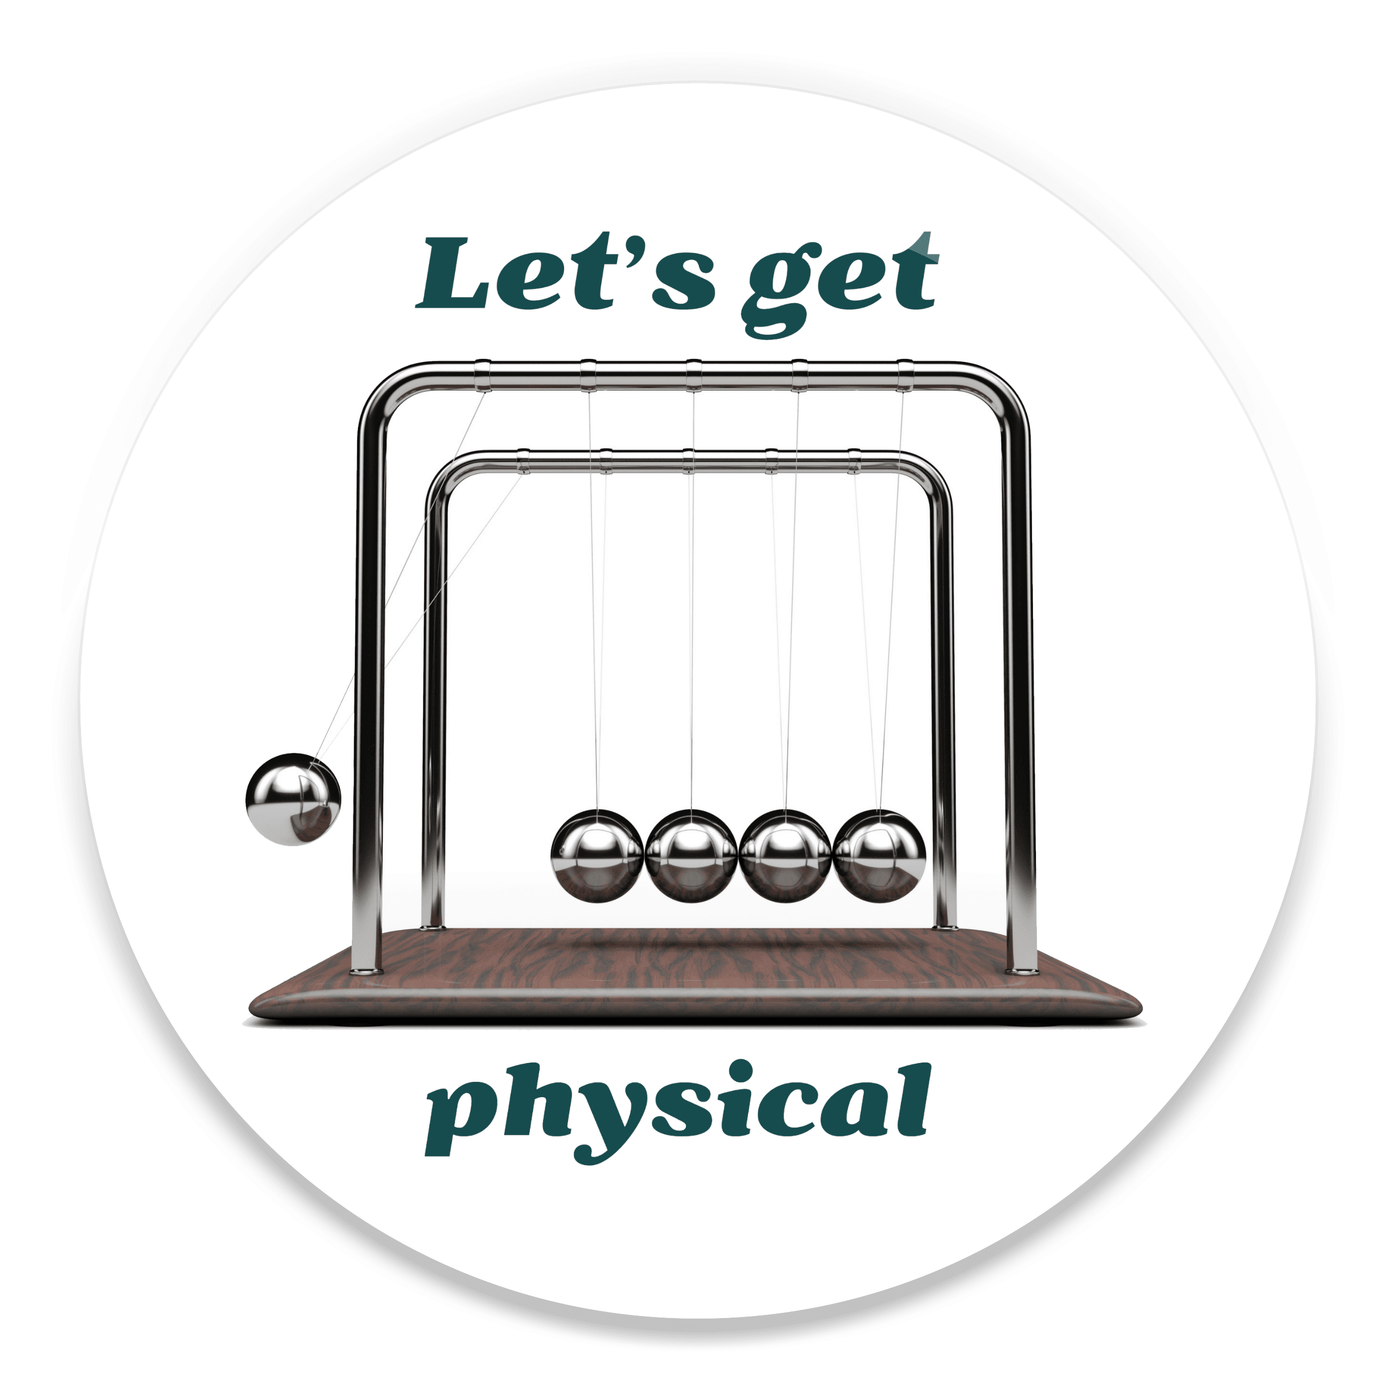 2.25 inch round colorful magnet with image of newton's cradle and text saying let's get physical